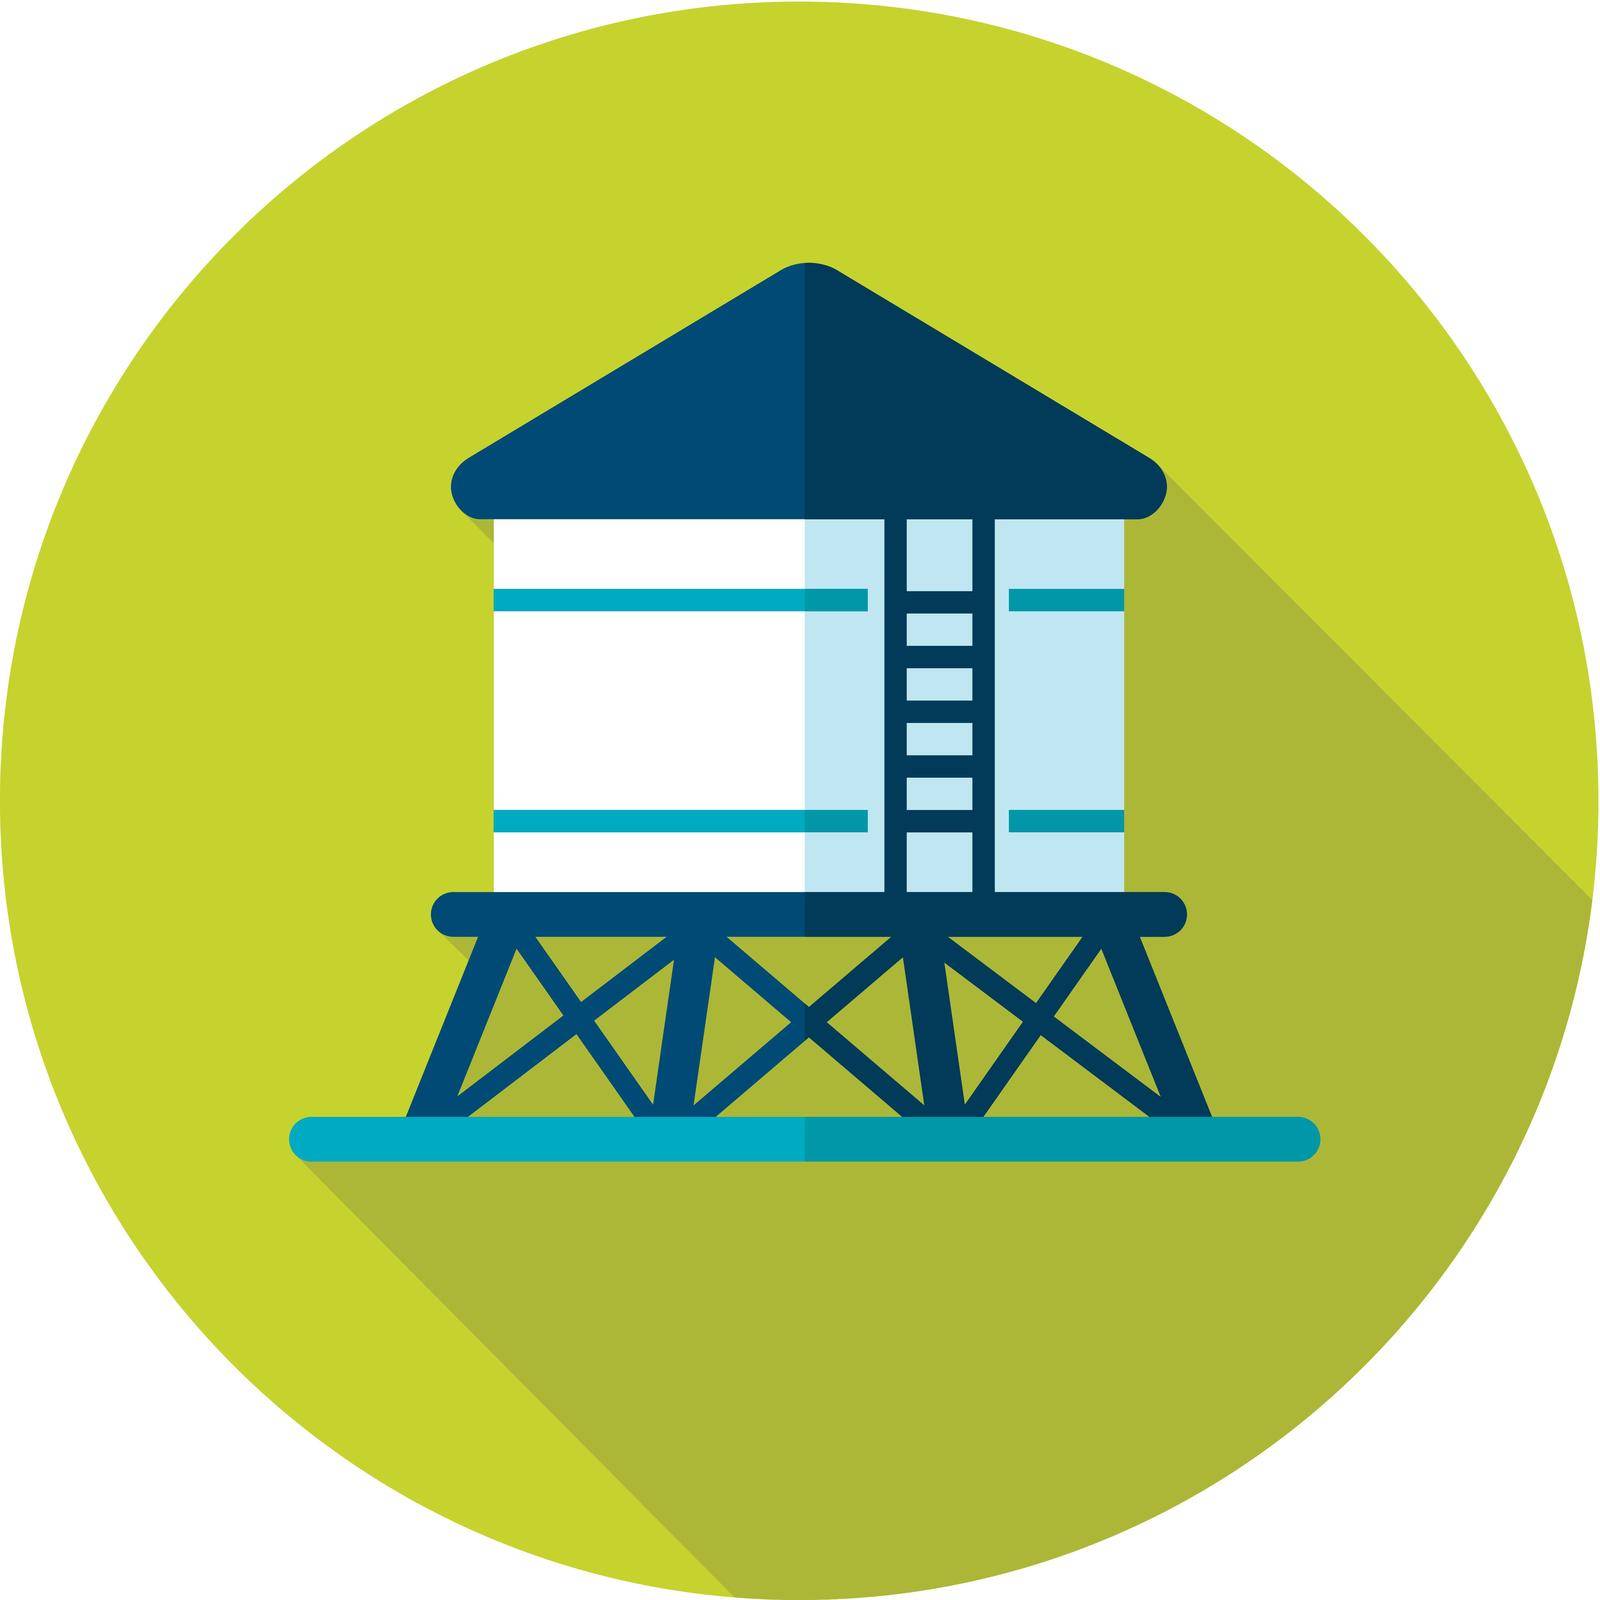 Water tower icon. Agriculture sign. Graph symbol for your web site design, logo, app, UI. Vector illustration, EPS10.